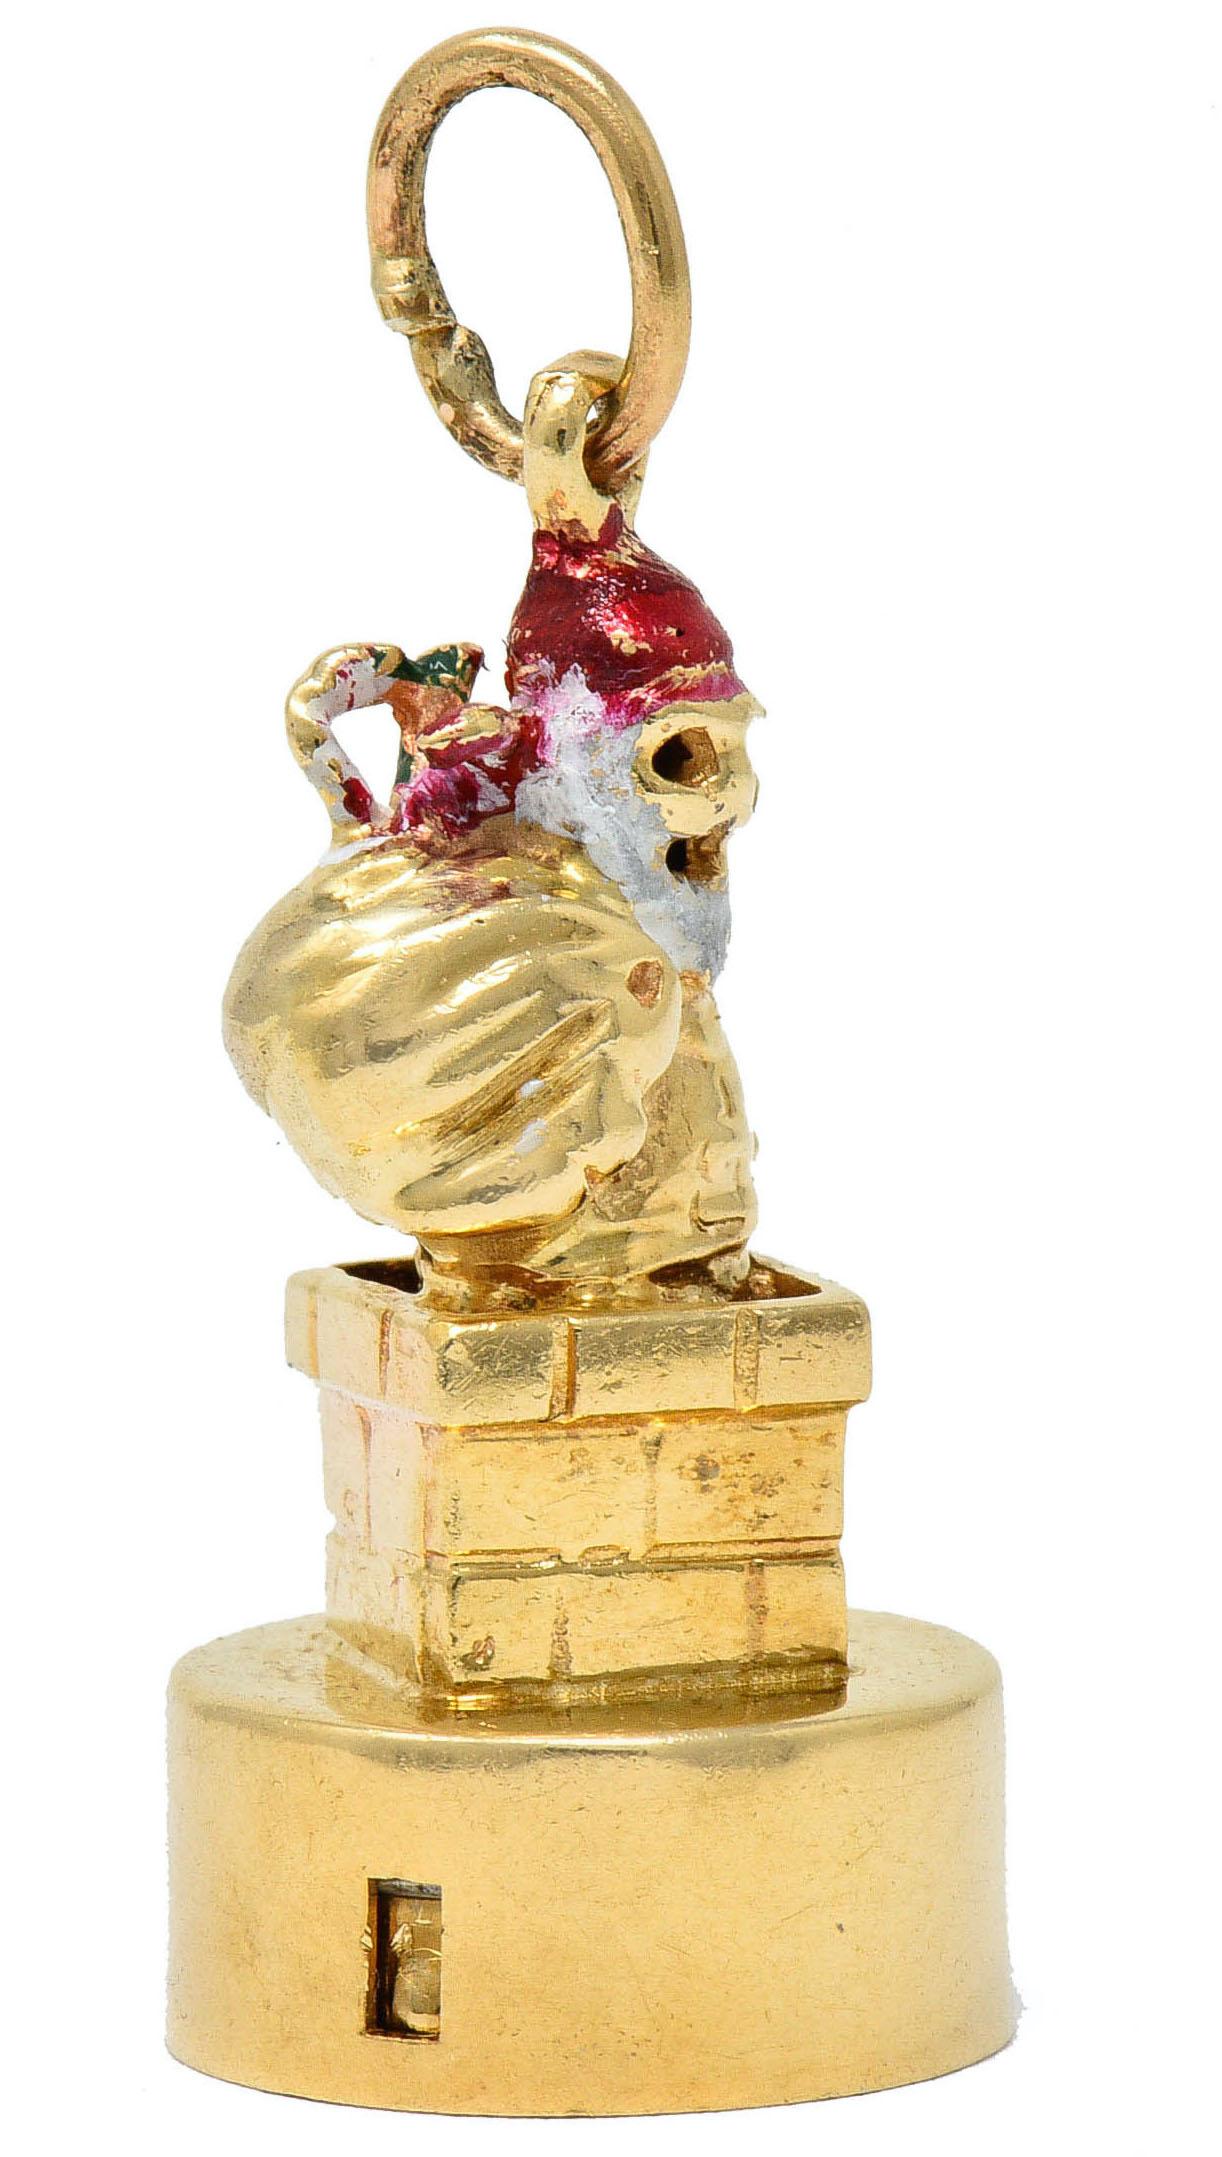 Substantial charm is designed as Santa Claus with a rusack over his shoulder

Beard and hat are glossed white and red with enamel; exhibiting some loss

Face lights up when bottom of charm is pressed

Pedestal is designed as a chimney with deeply